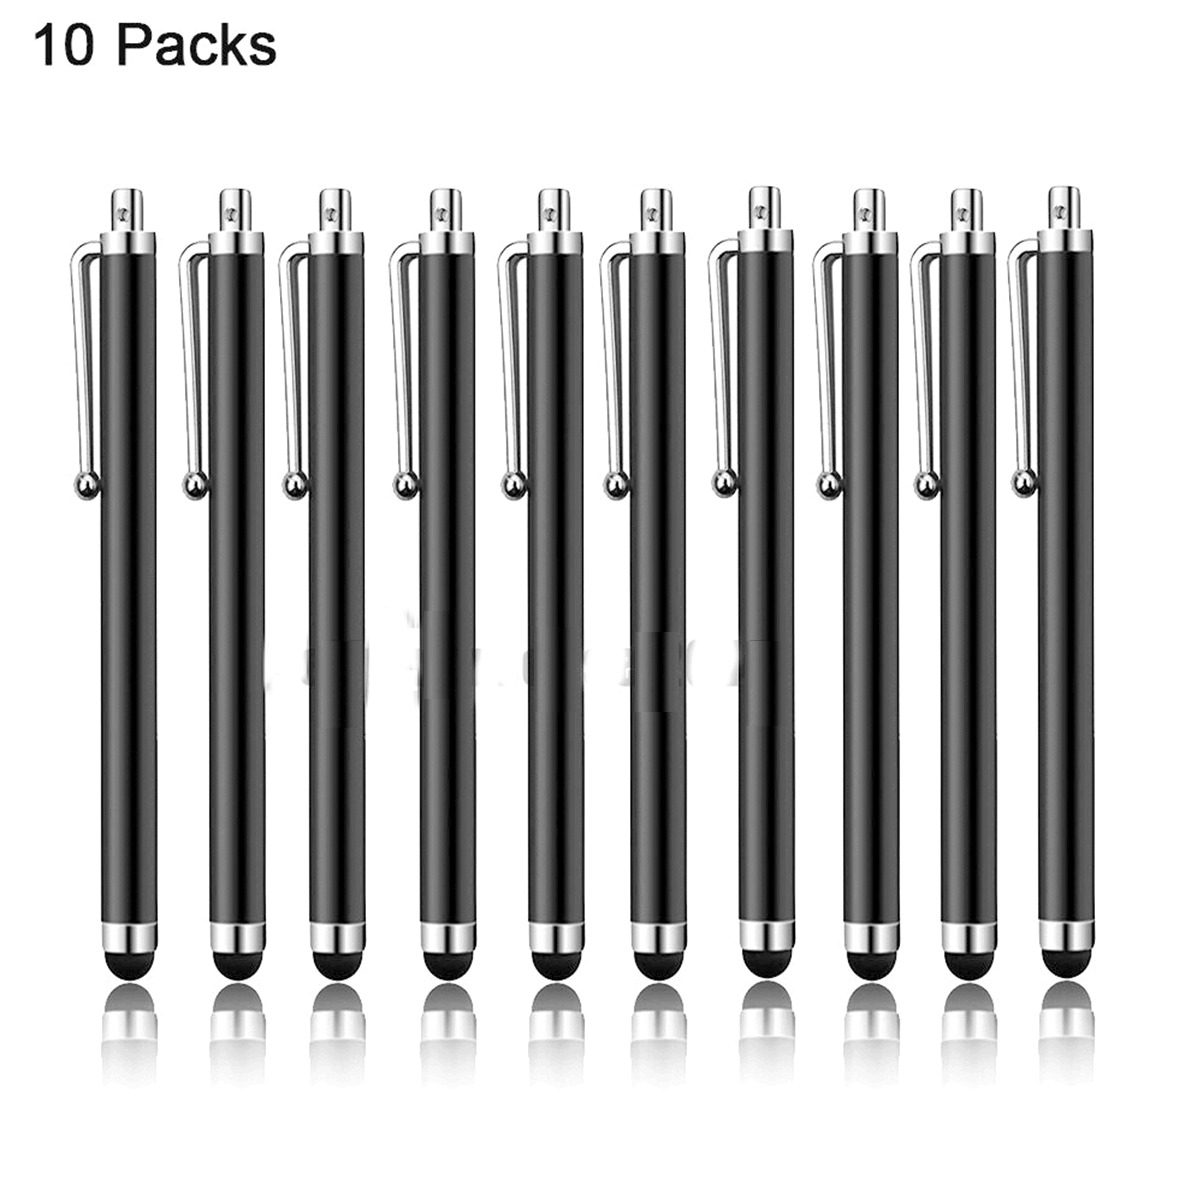 10x Stylus Pens Universal for iPad iPhone Tablets Samsung Galaxy Touch Screens